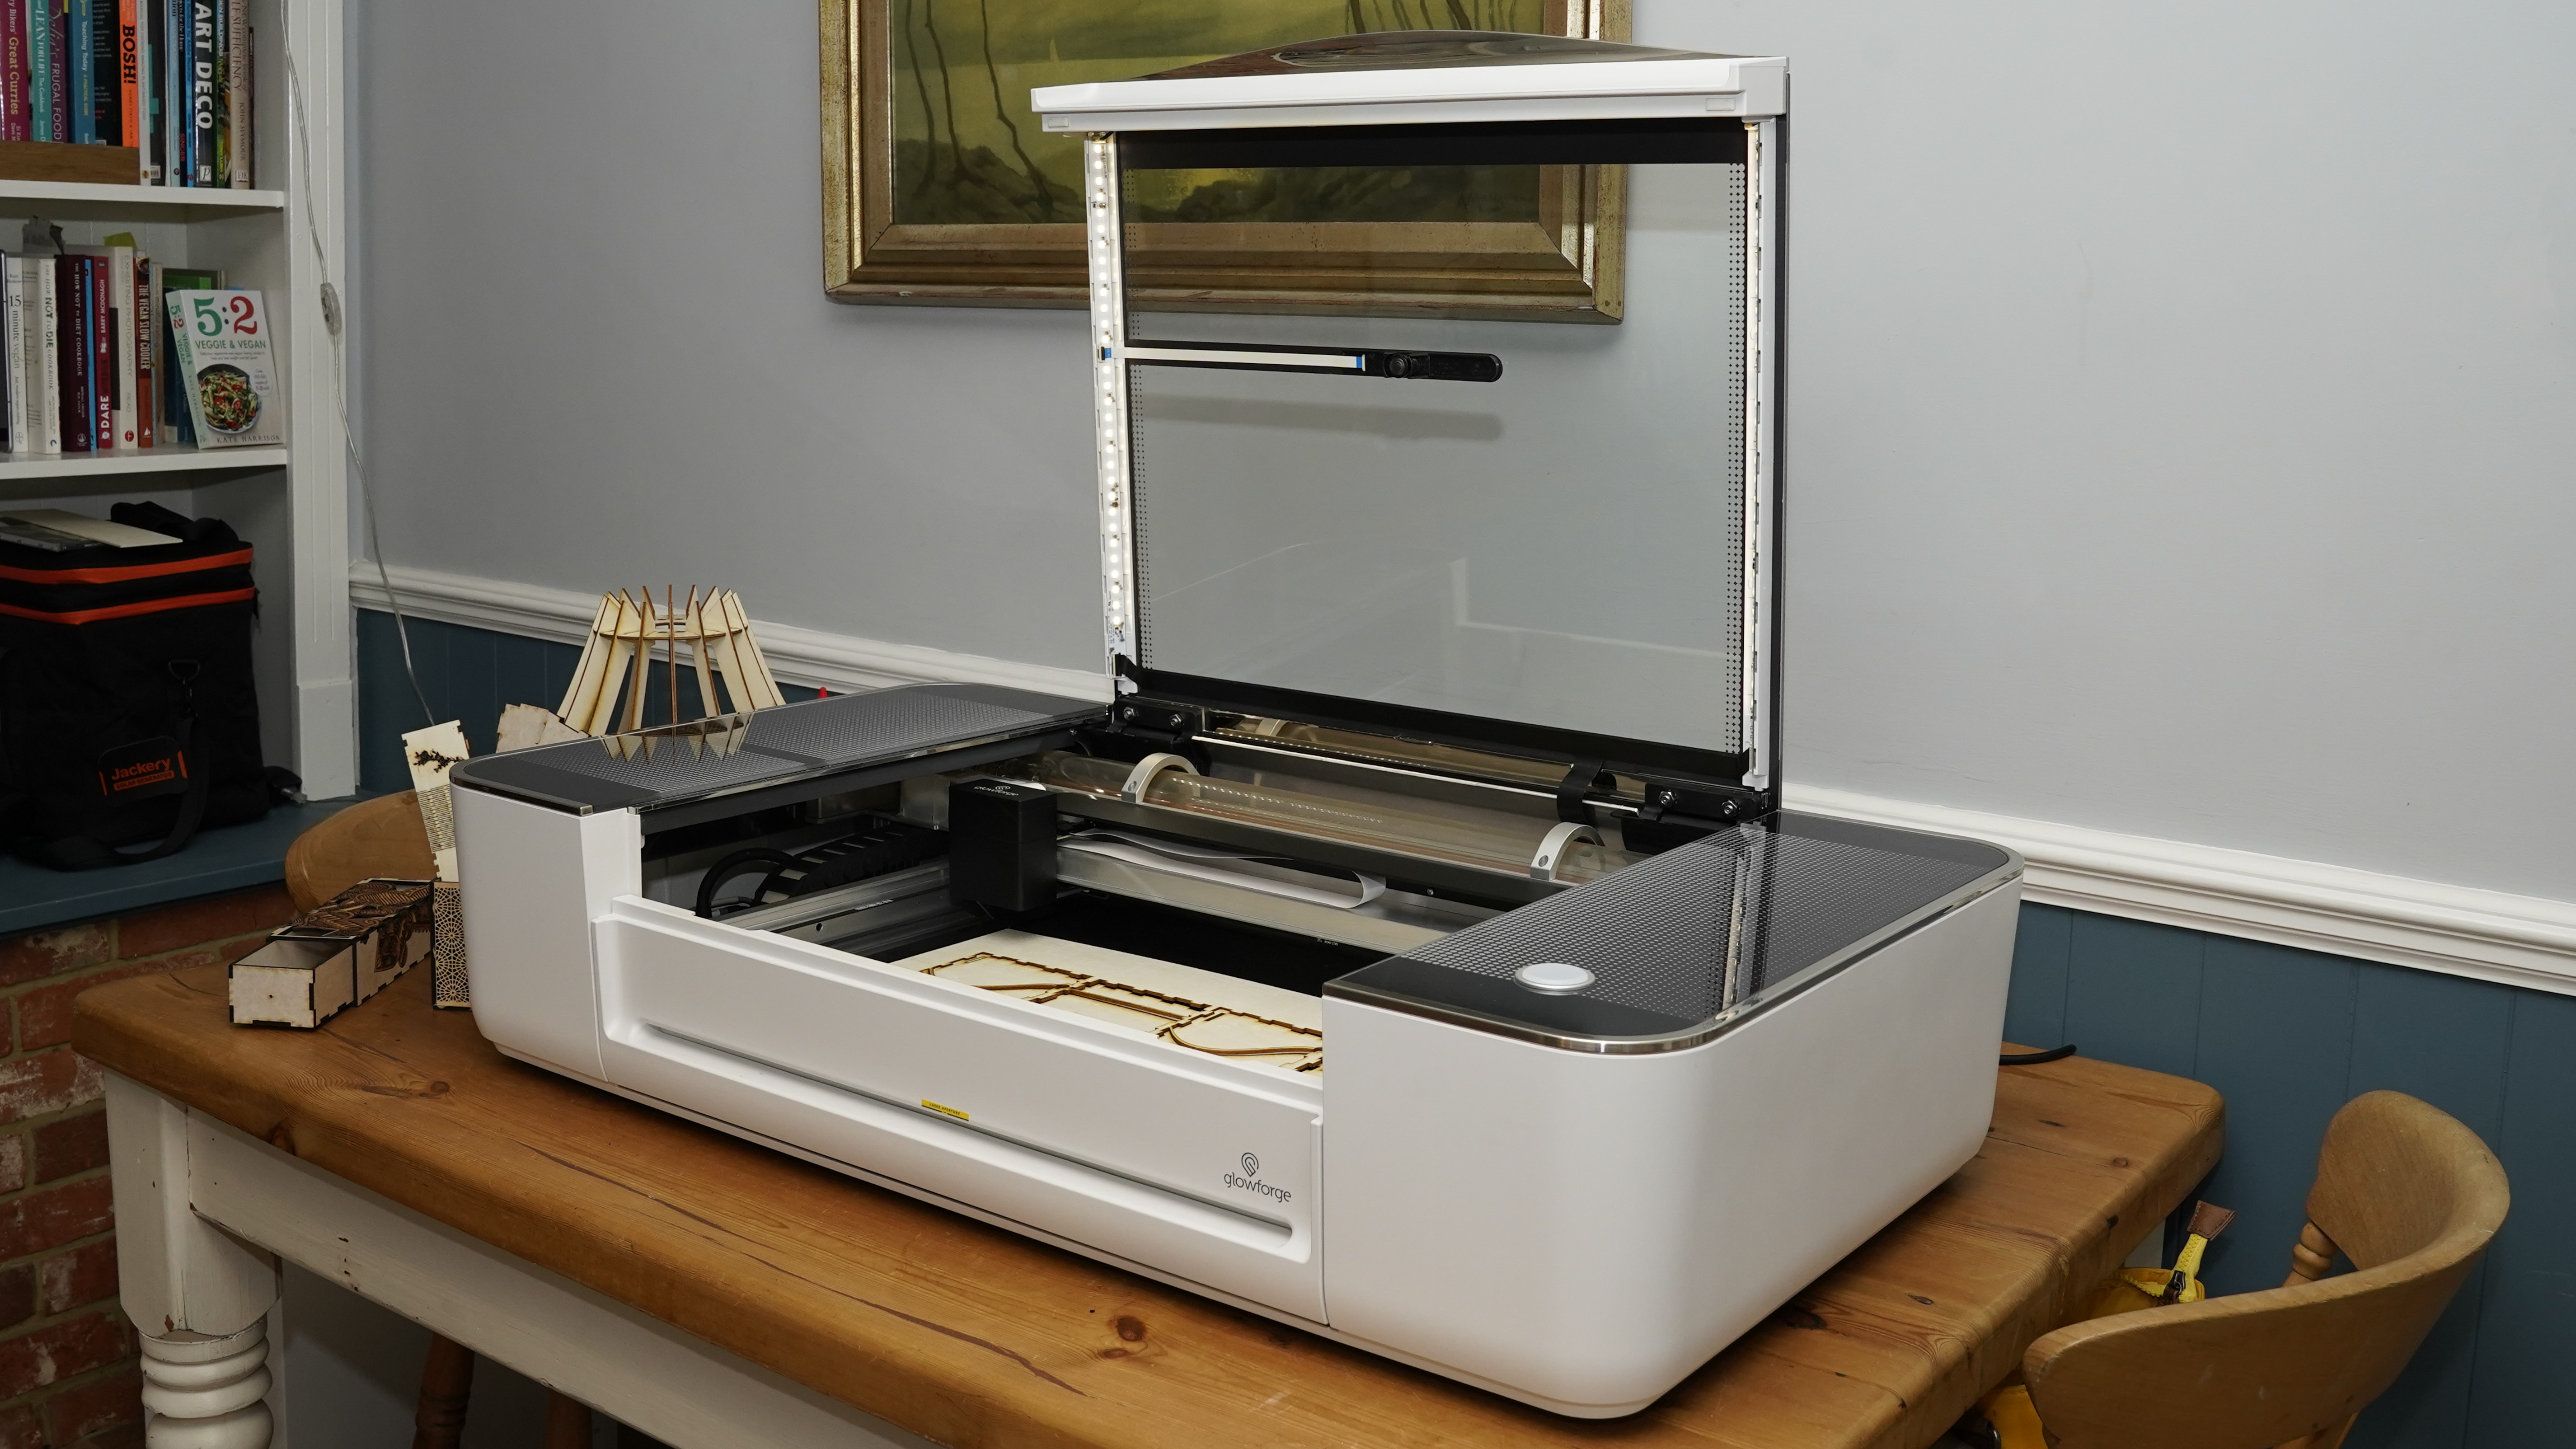 Glowforge Pro laser cutter review